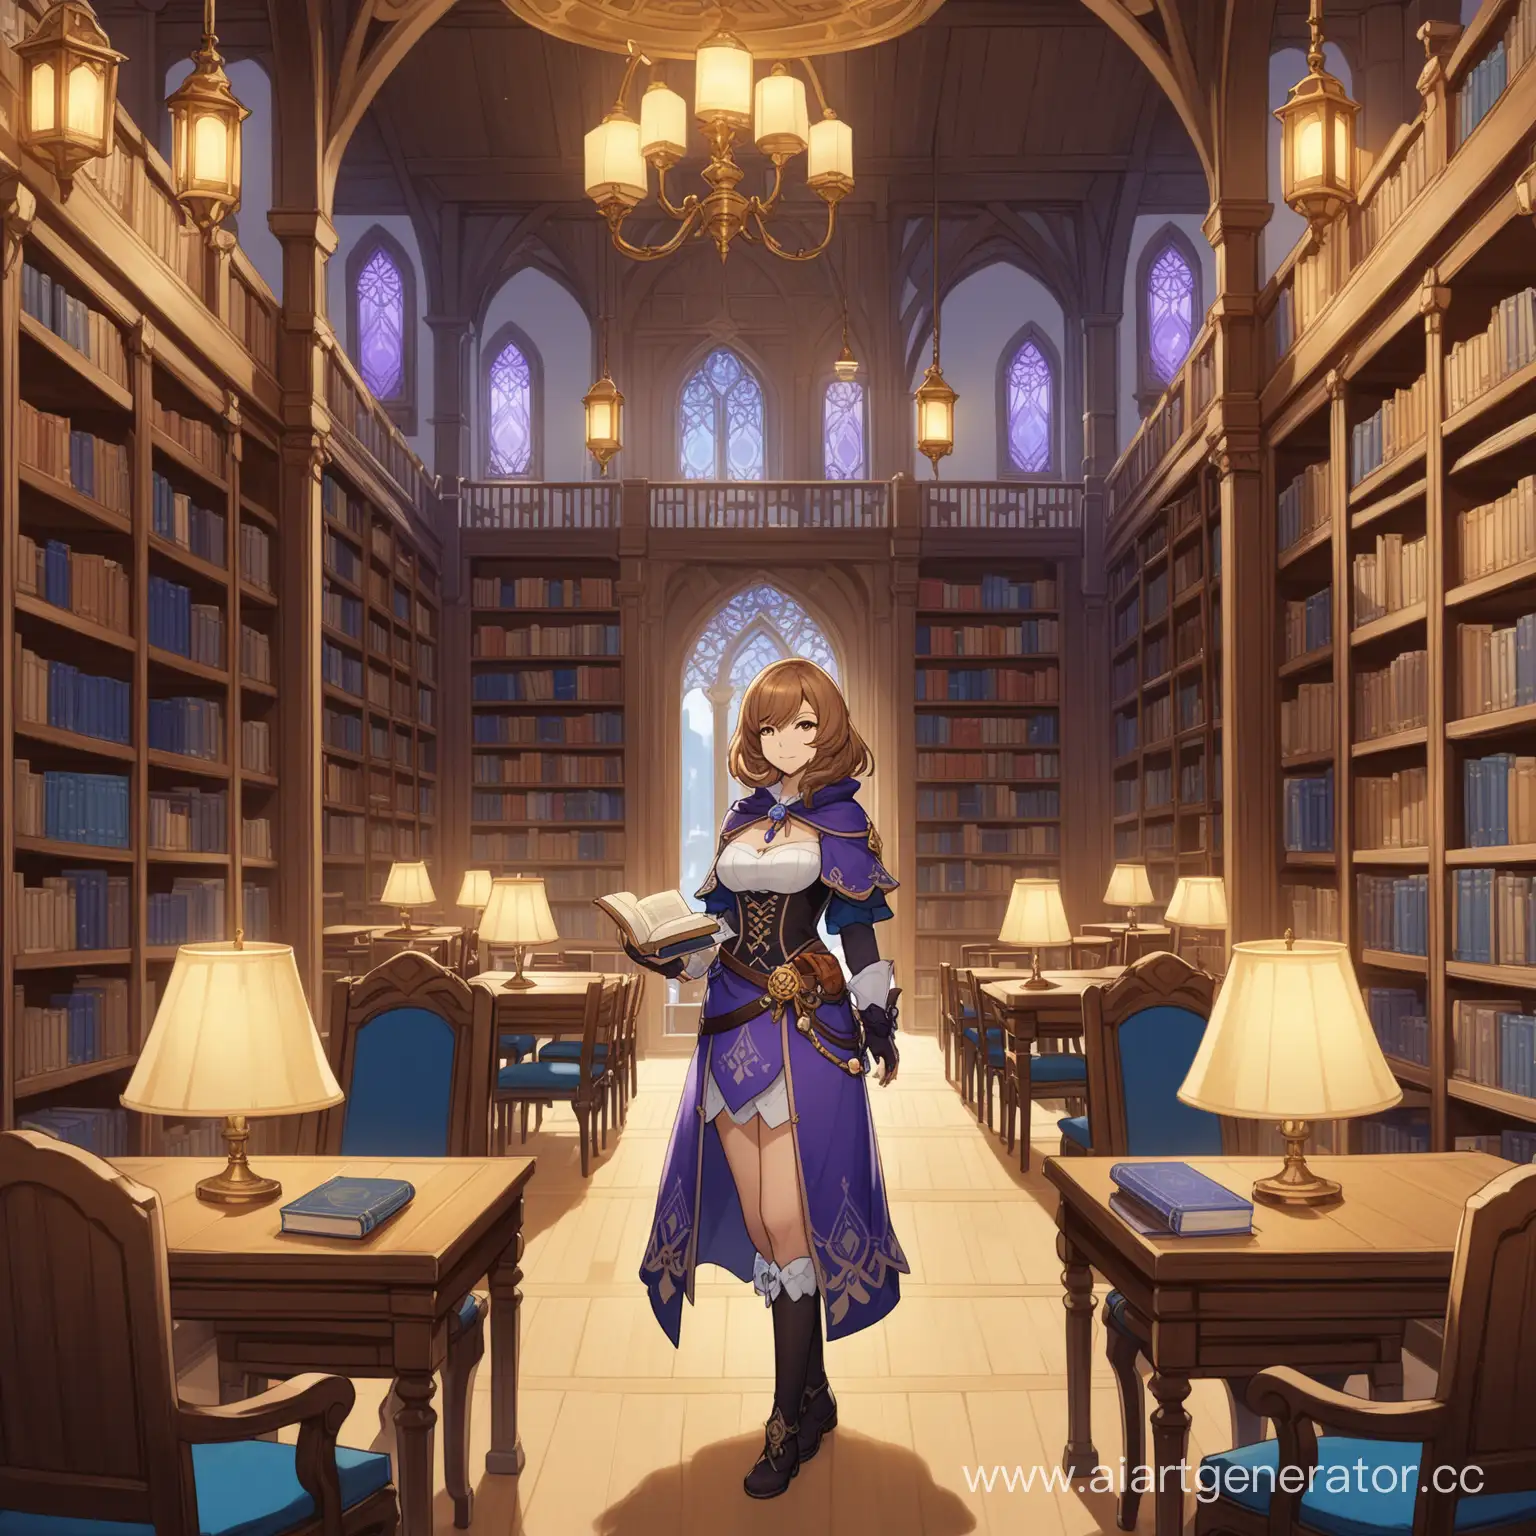 Genshin-Impacts-Lisa-in-a-Cozy-Library-with-Books-and-Accessories